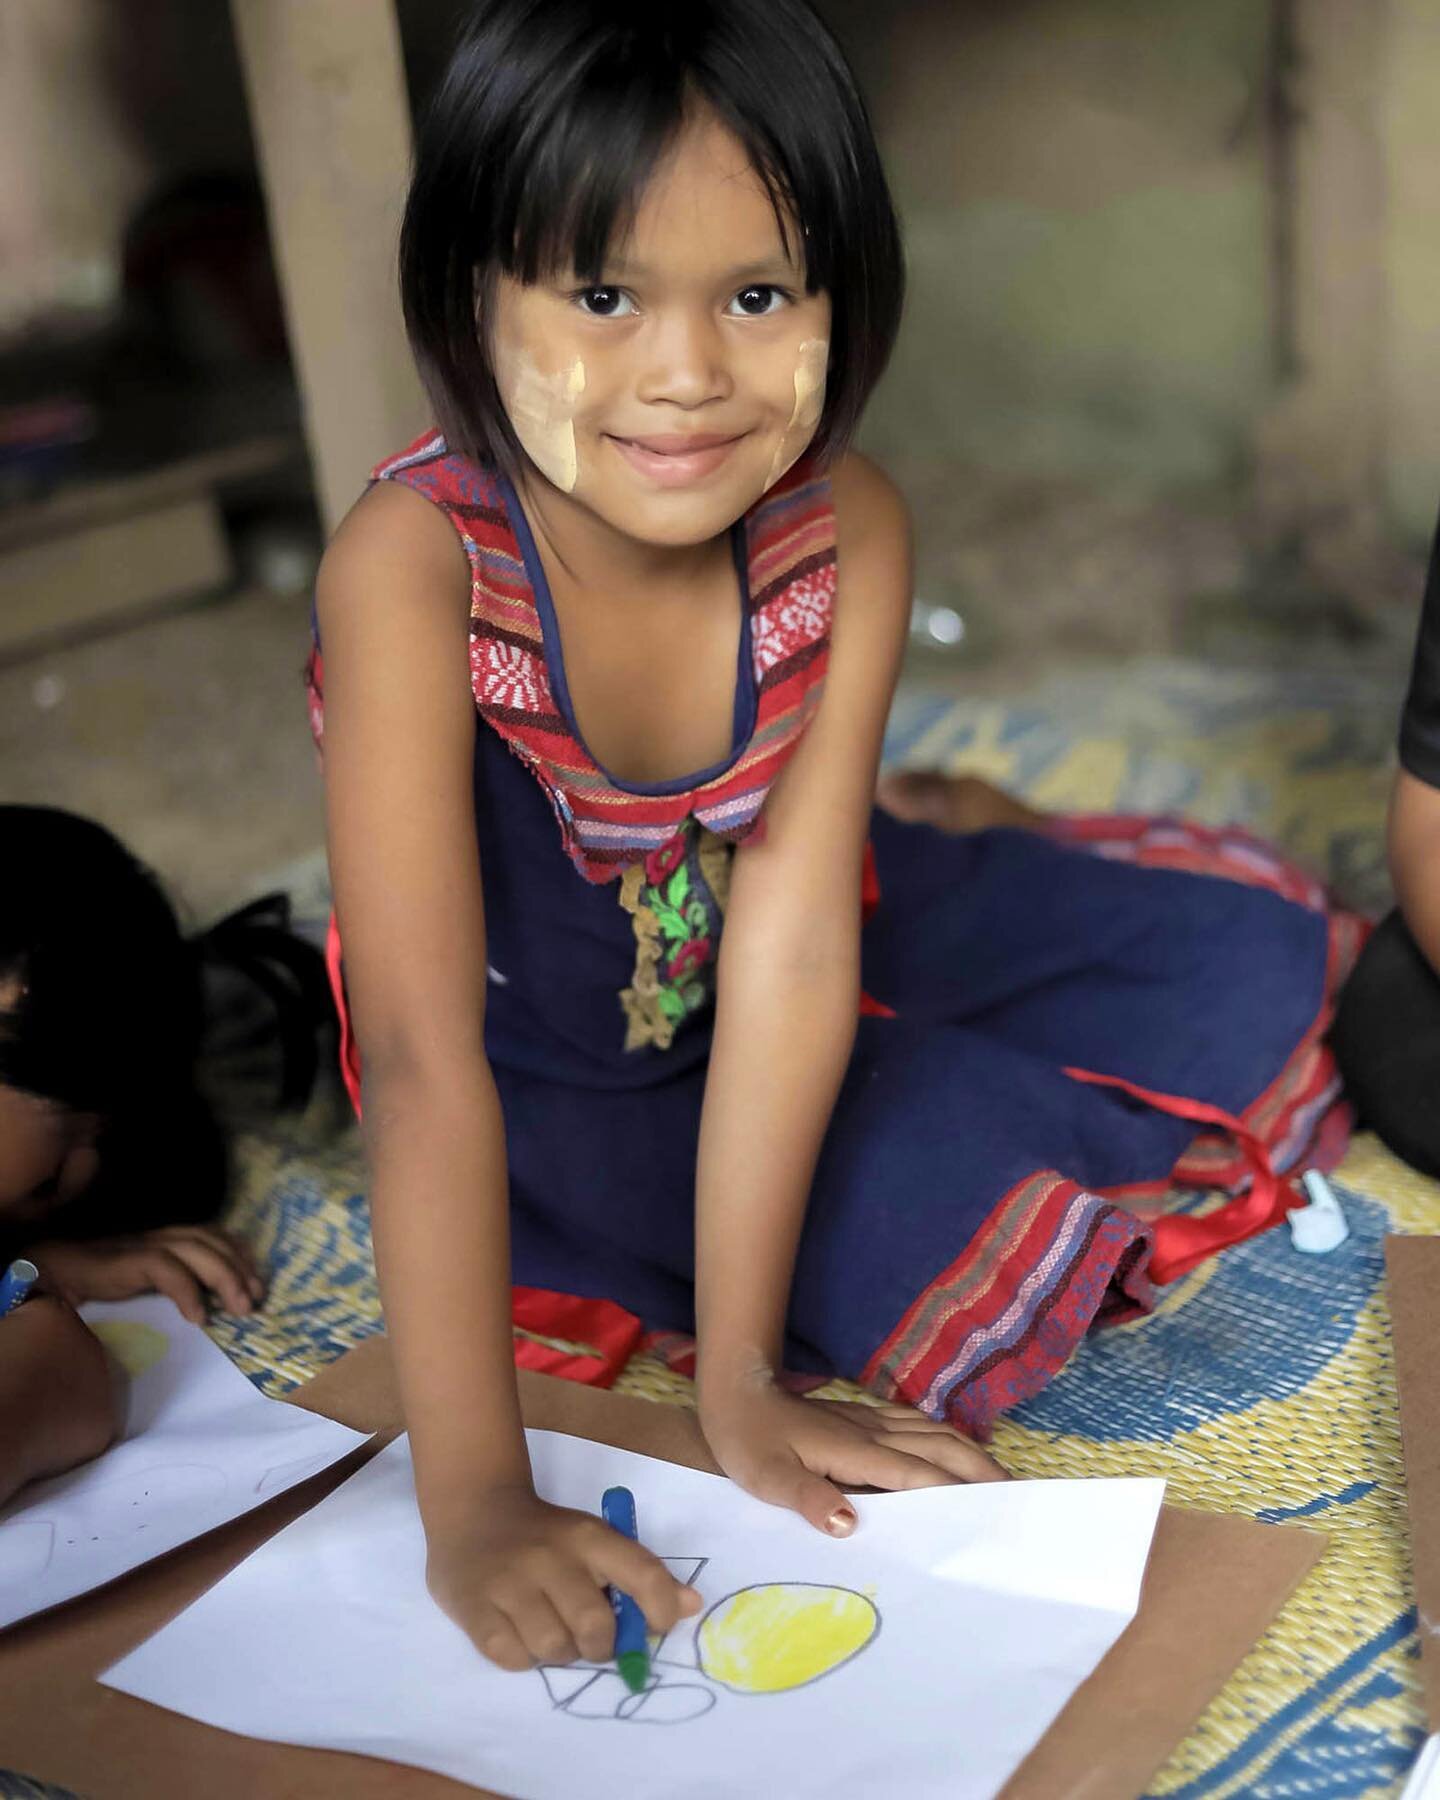 As part of our mission to reach children in marginalized communities, Make an Artist Foundation enhances art classes within Myanmar and Thailand. 

We teamed up with art educator John Khai to develop and sustain divergent thinking and creativity for 